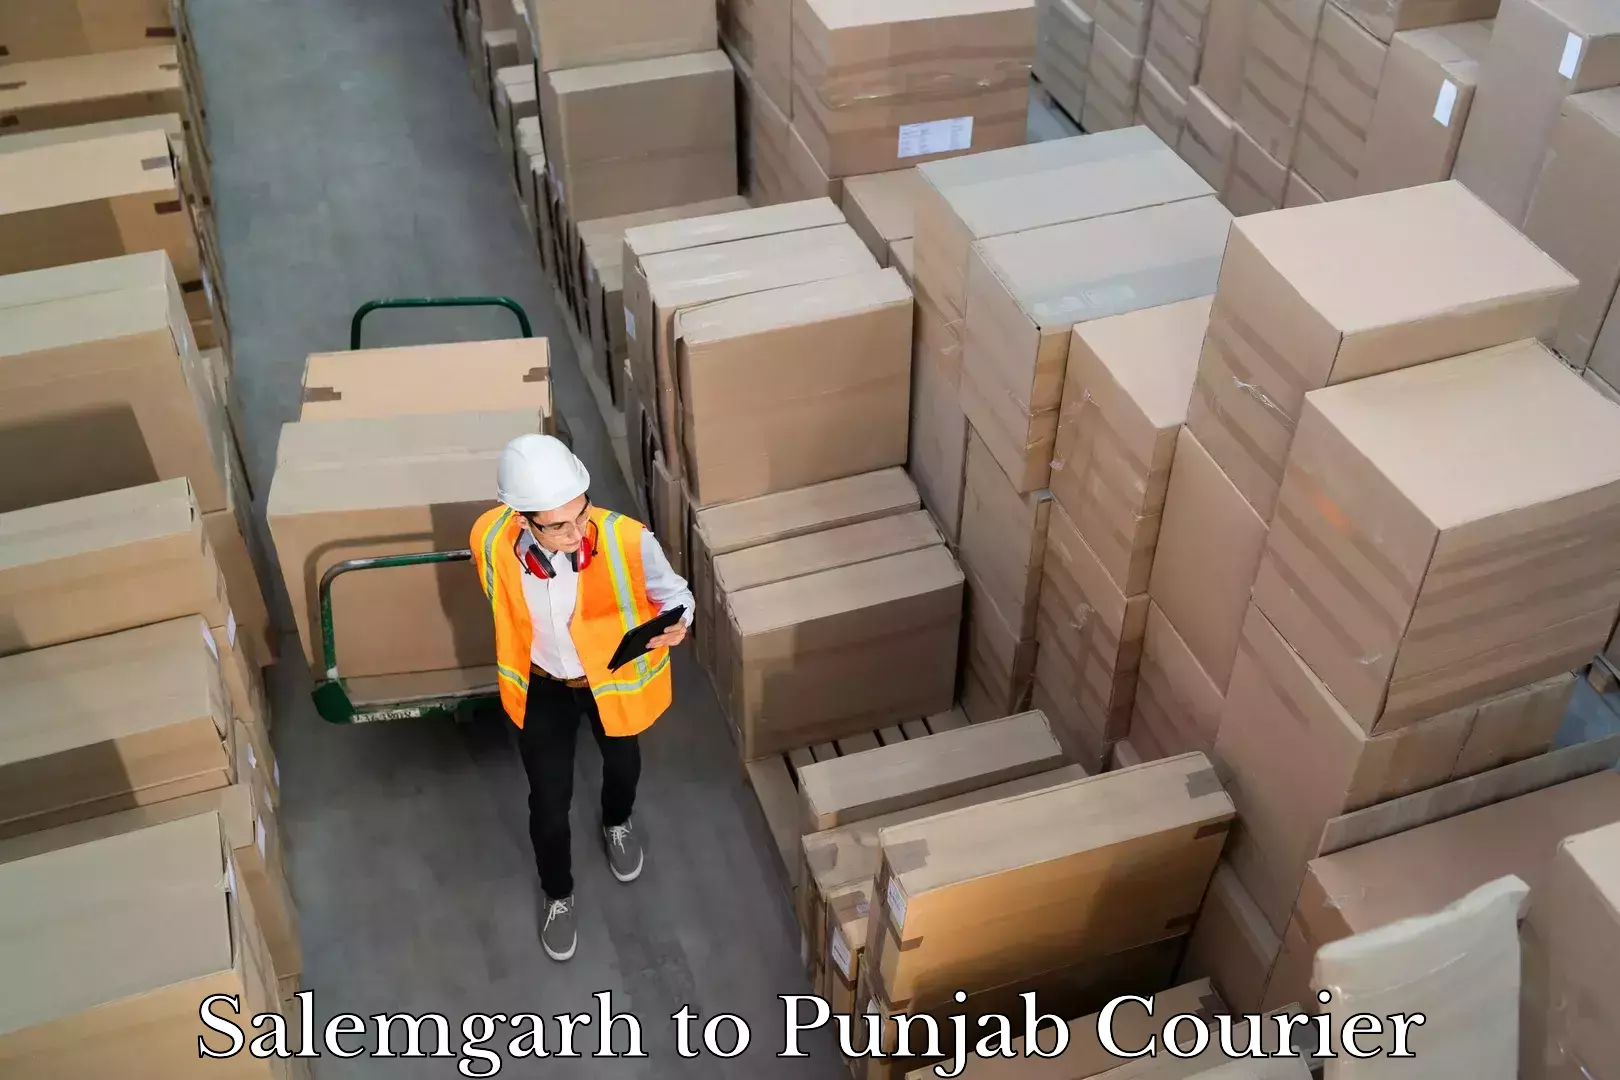 Courier dispatch services Salemgarh to Punjab